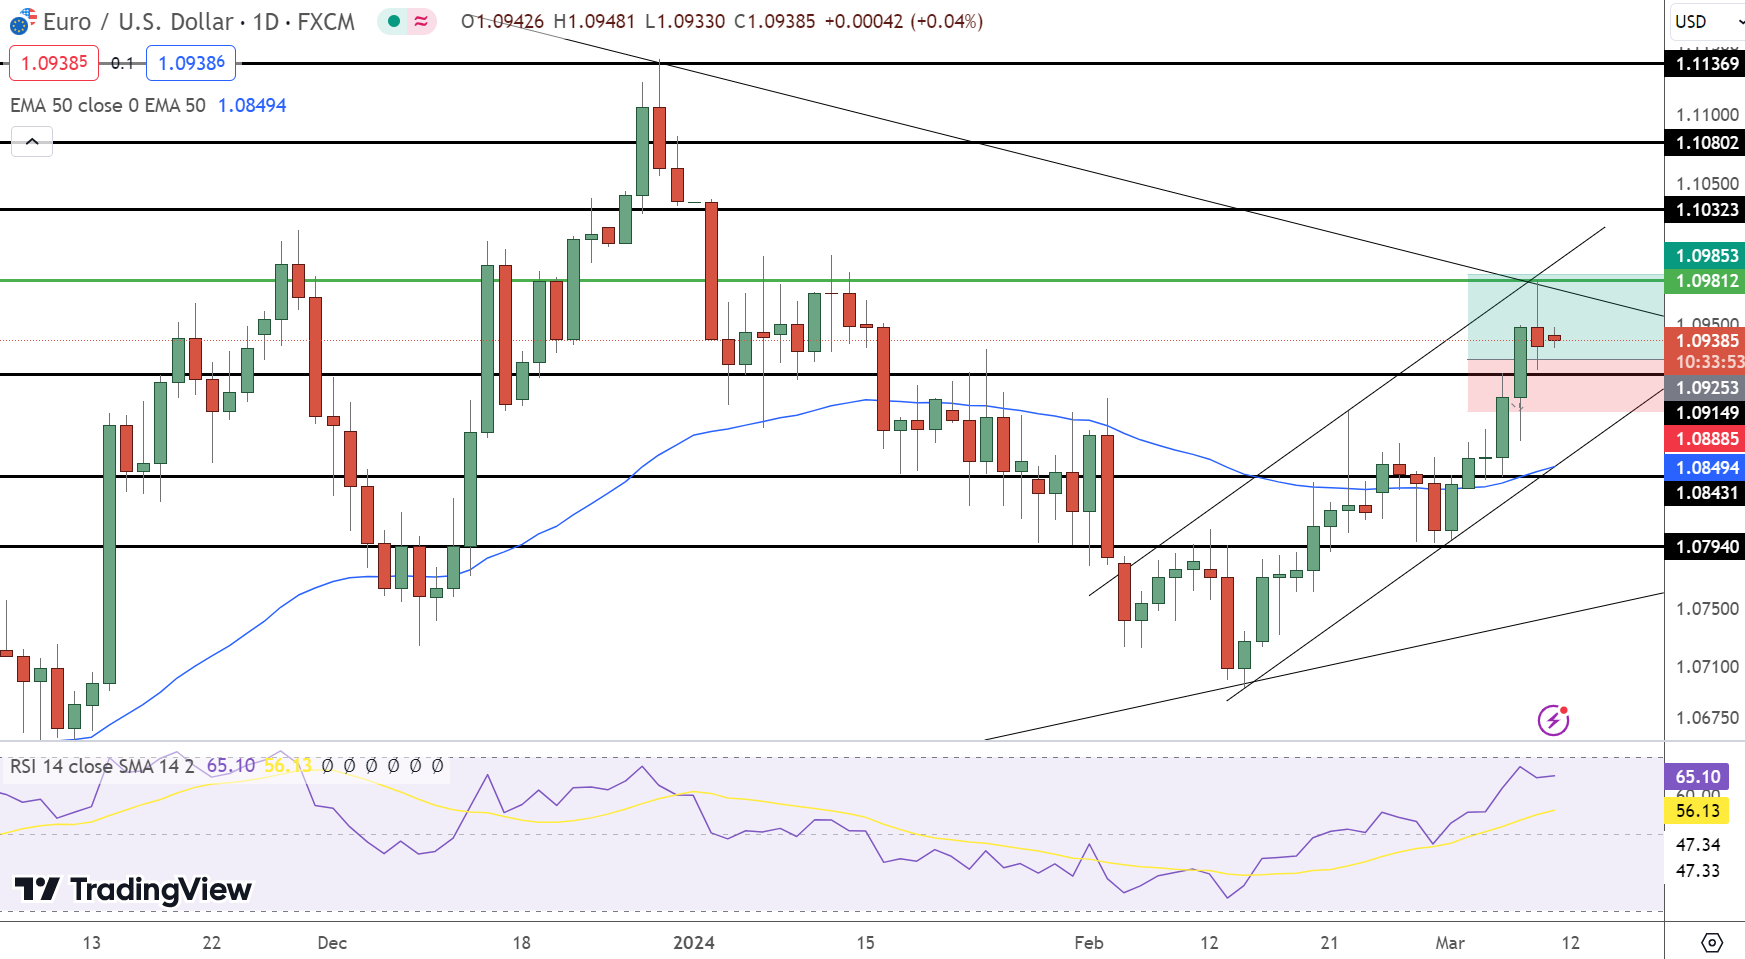 EUR/USD Price Forecast: Eyes on 1.0948 Amid ECB Stance and US Jobs Data